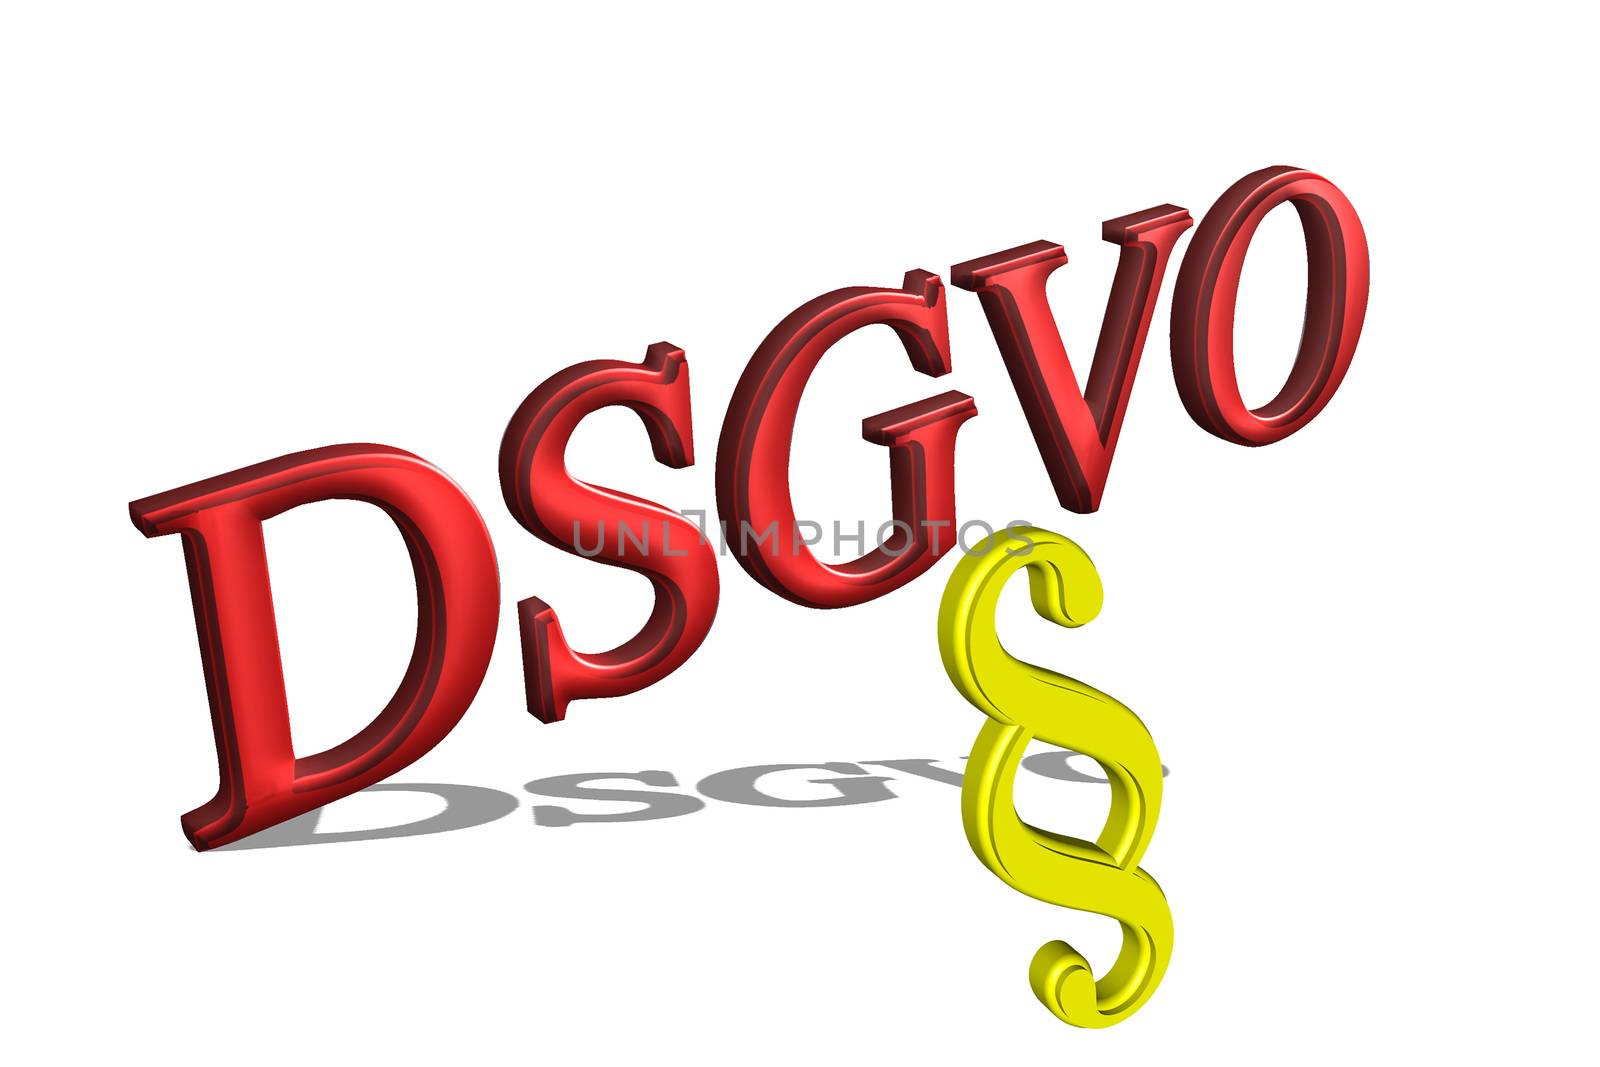 Concept "DSGVO" basic regulation in 3D      by JFsPic